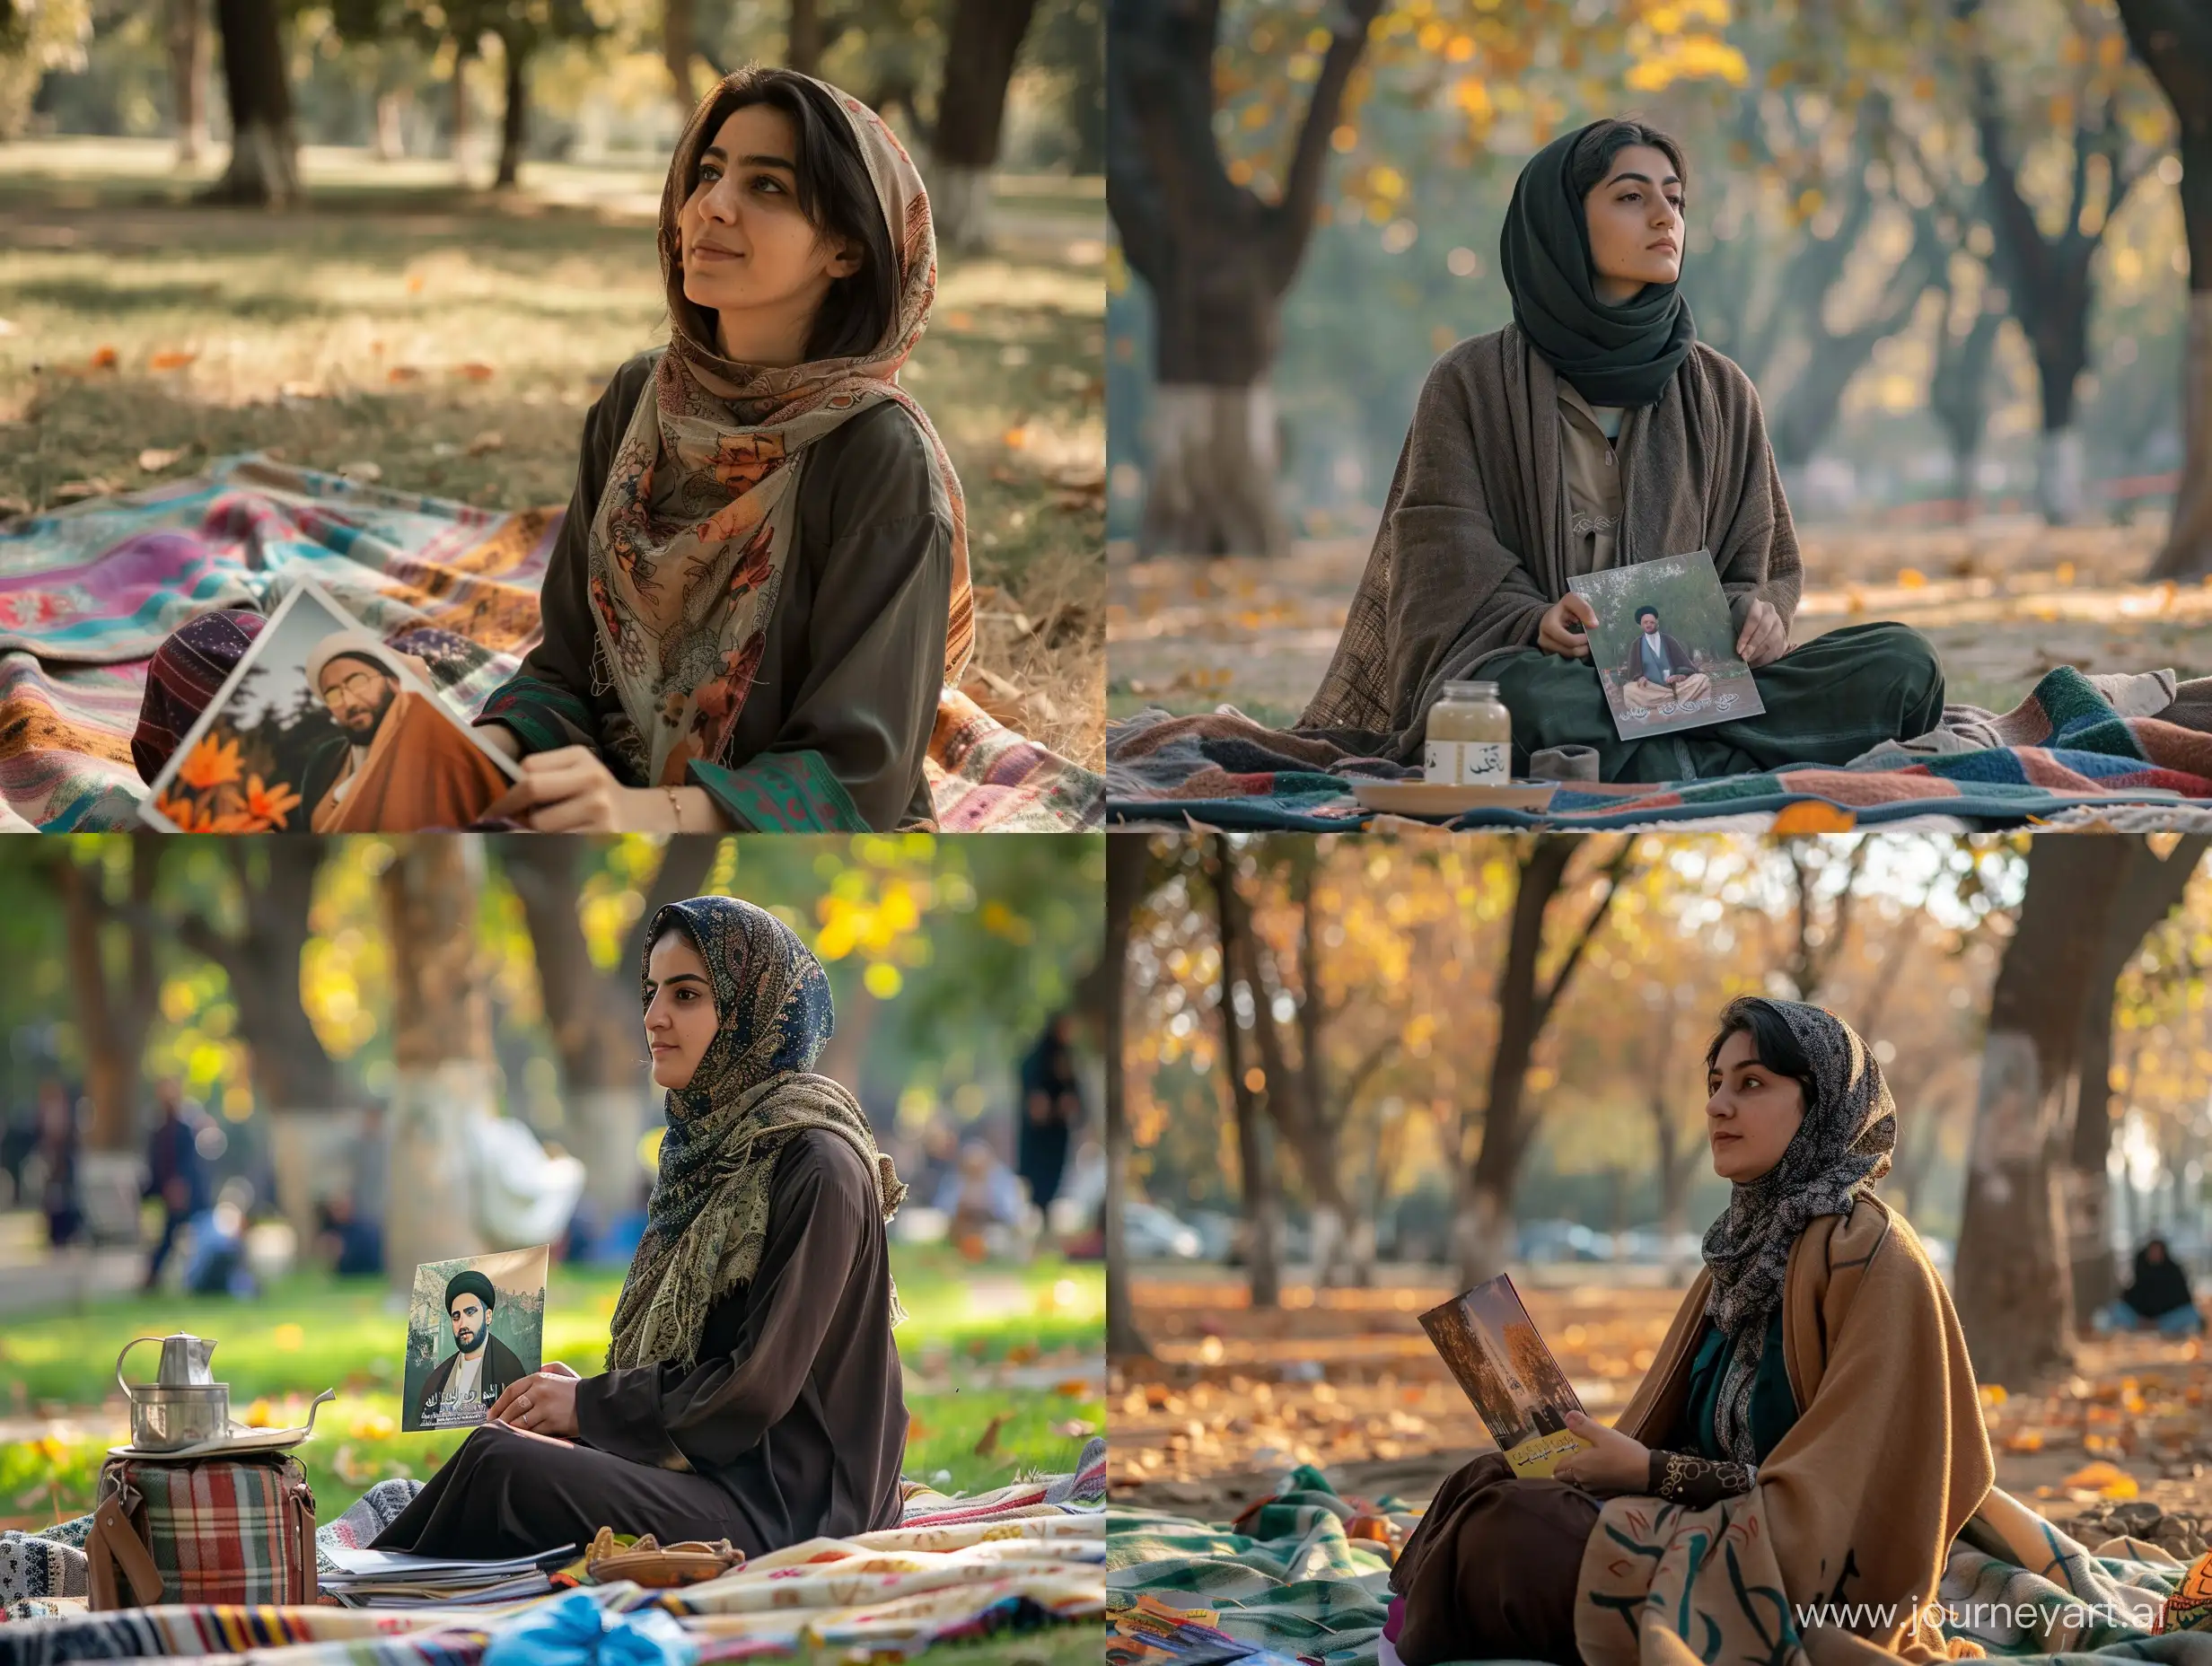 A 33 years old iranian muslim girl, siting on the blanket chair in park, having a photo of martyr Ebrahim Hadi and is looking a it